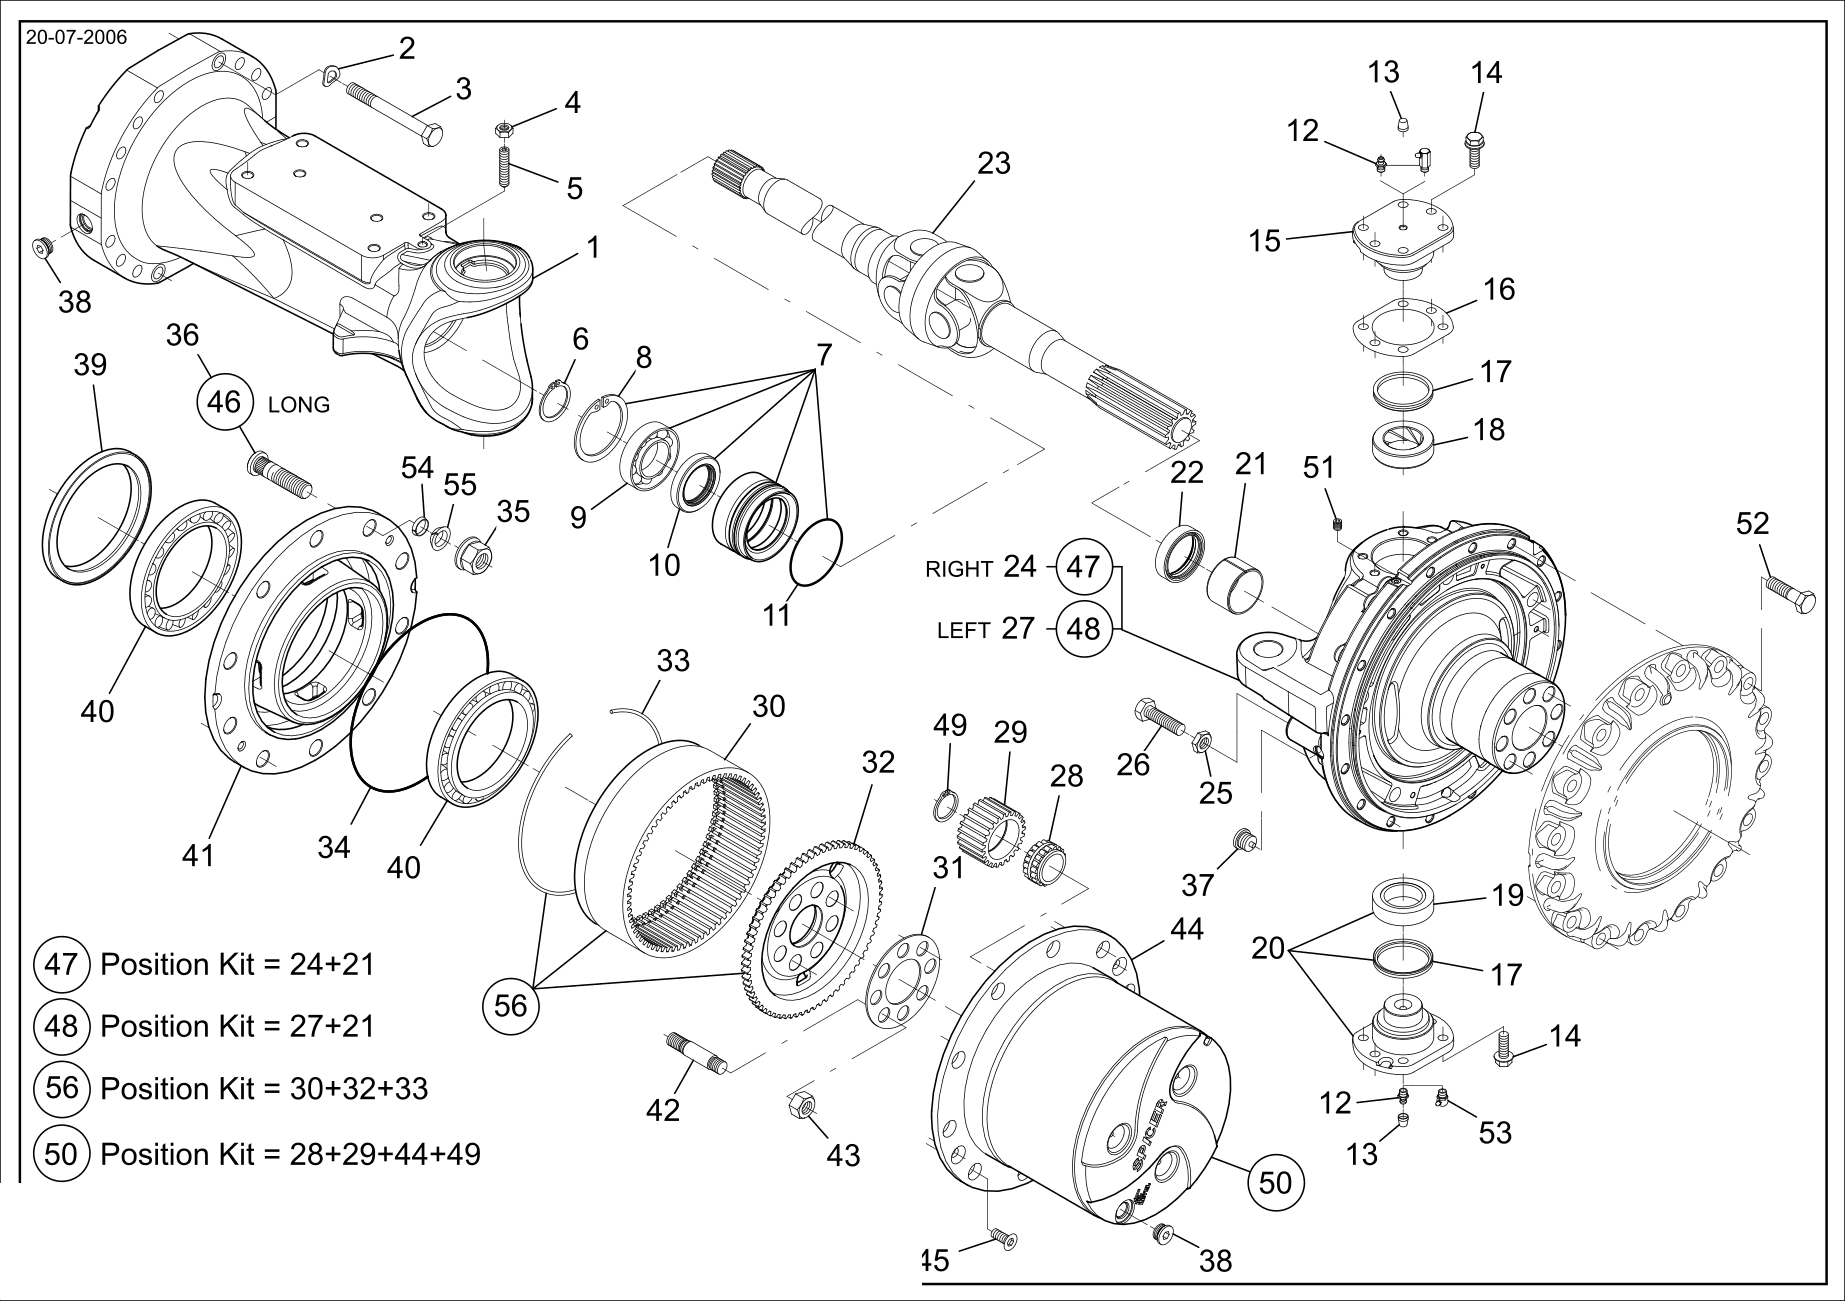 drawing for CNH NEW HOLLAND 72111365 - ARTICULATION (figure 1)